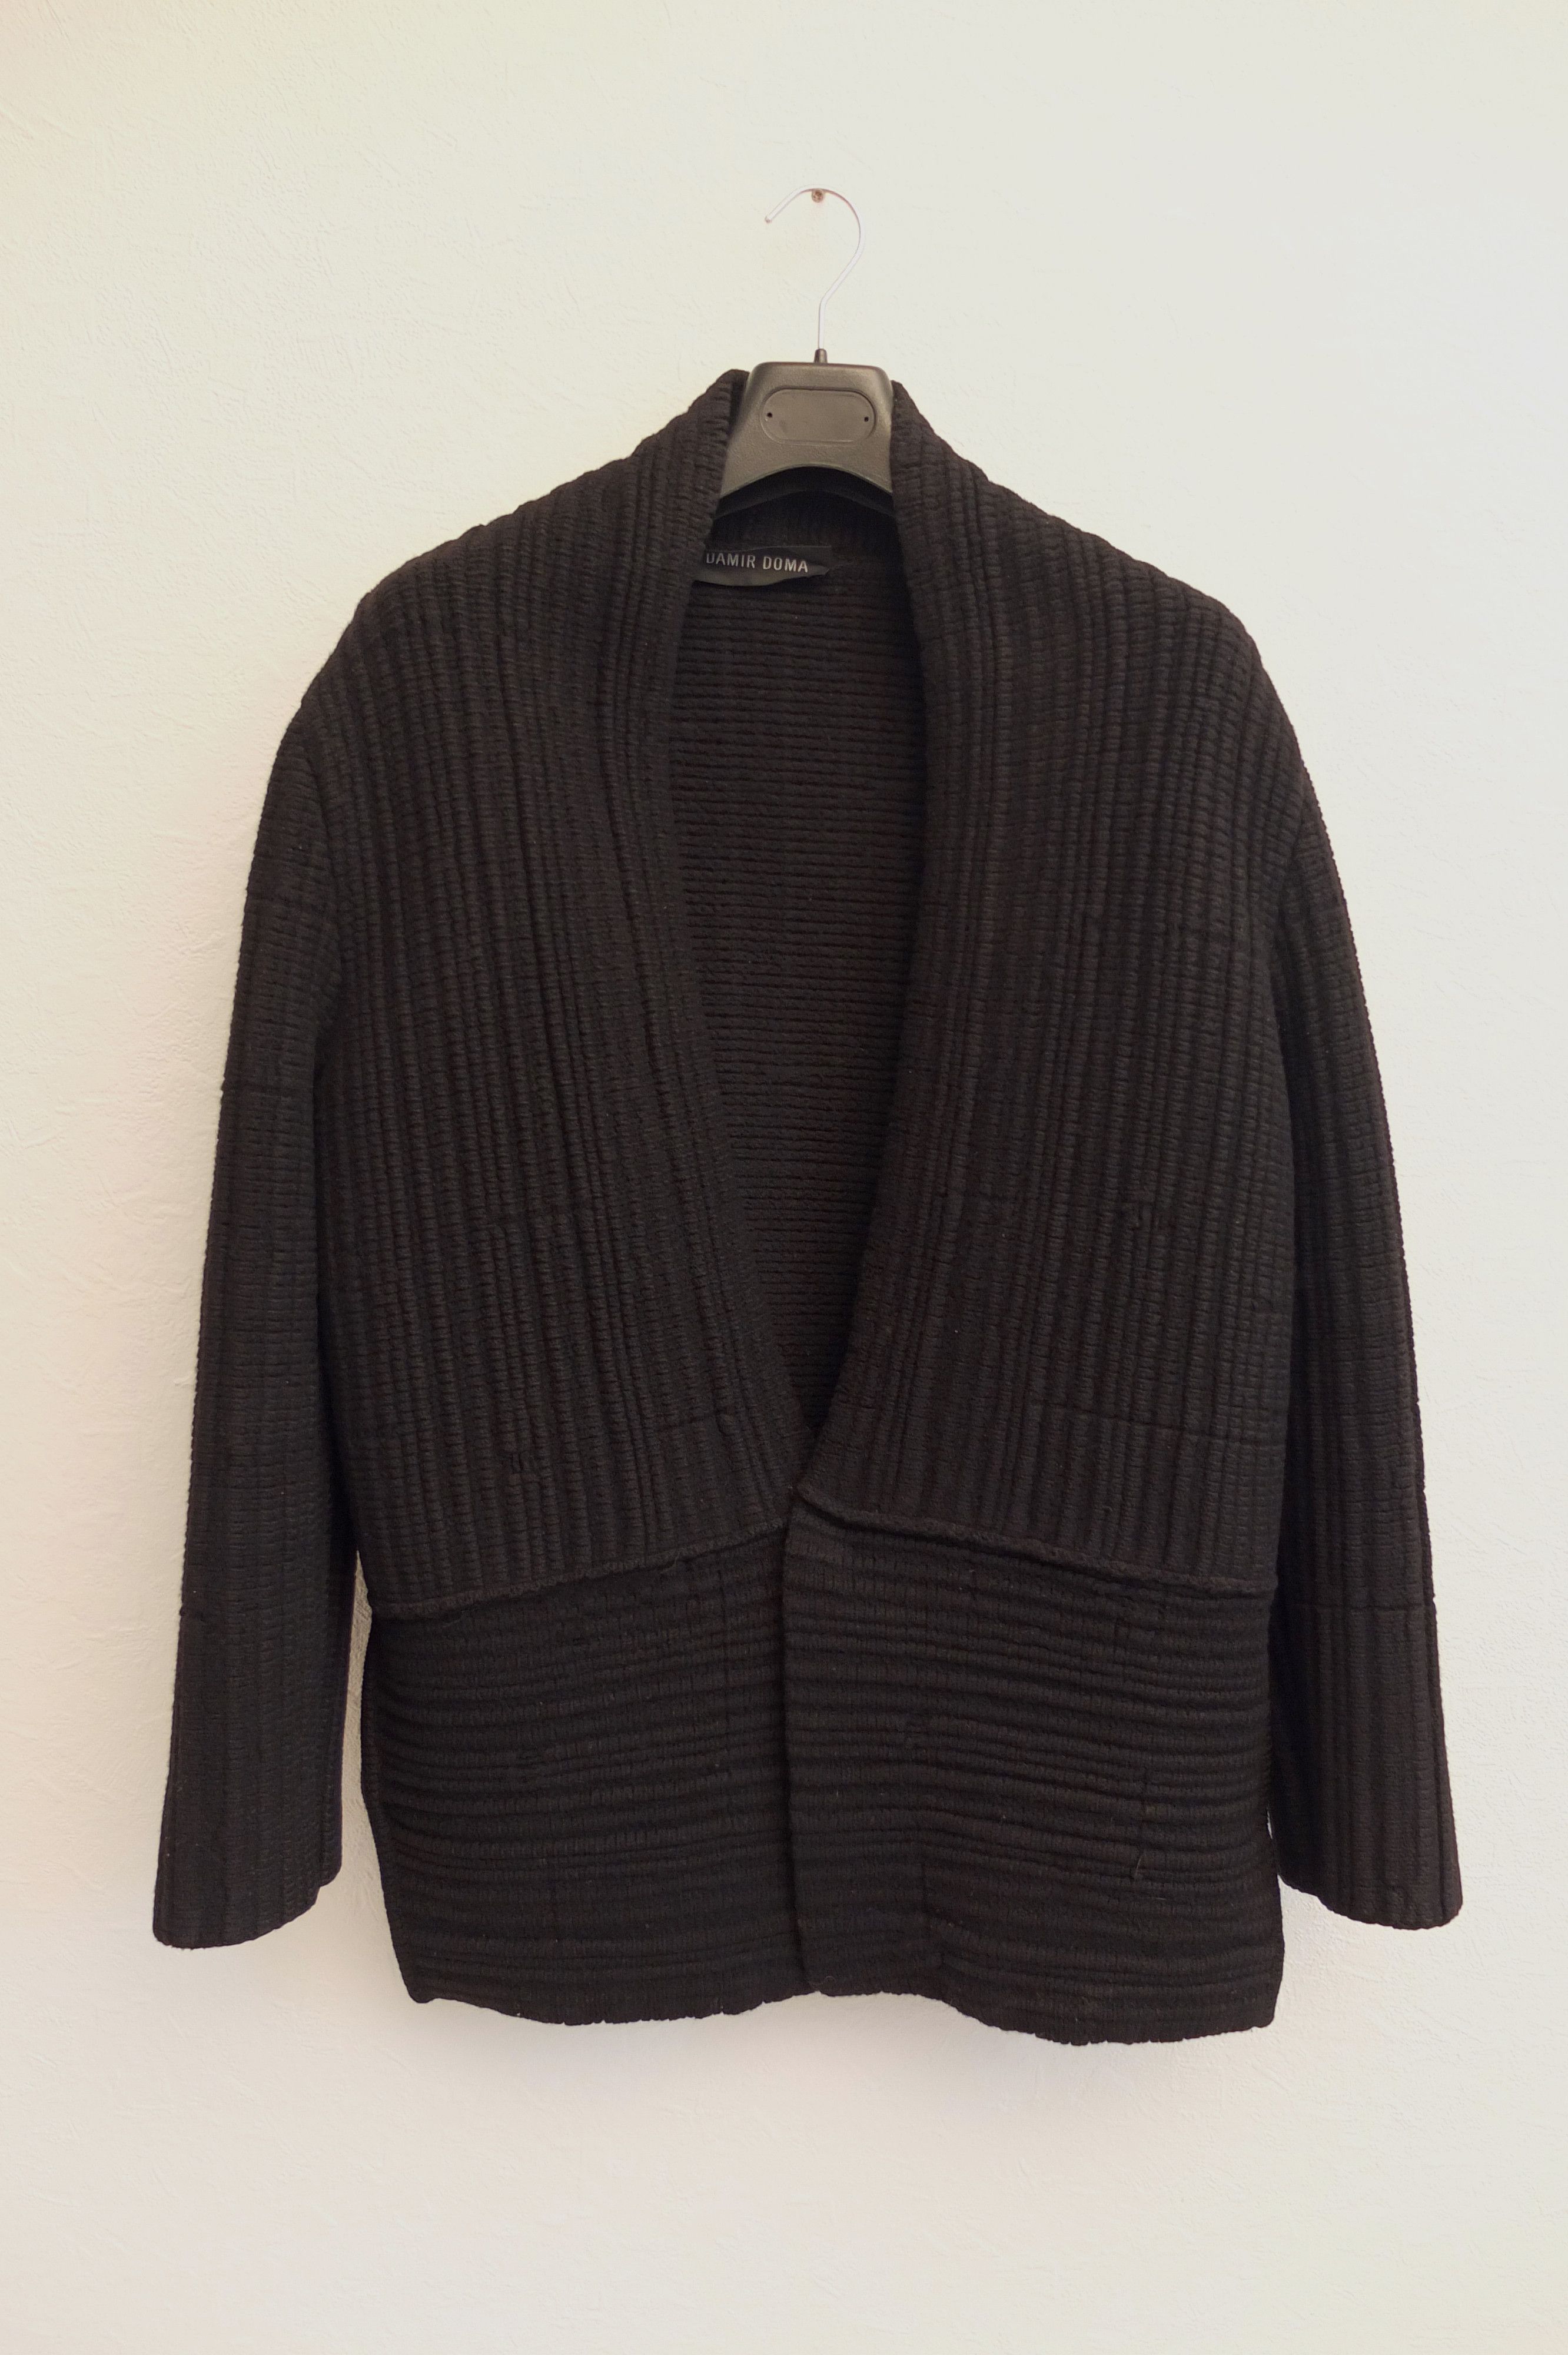 Damir Doma Archive Heavy Cardigan masterpiece from FW 2011 | Grailed